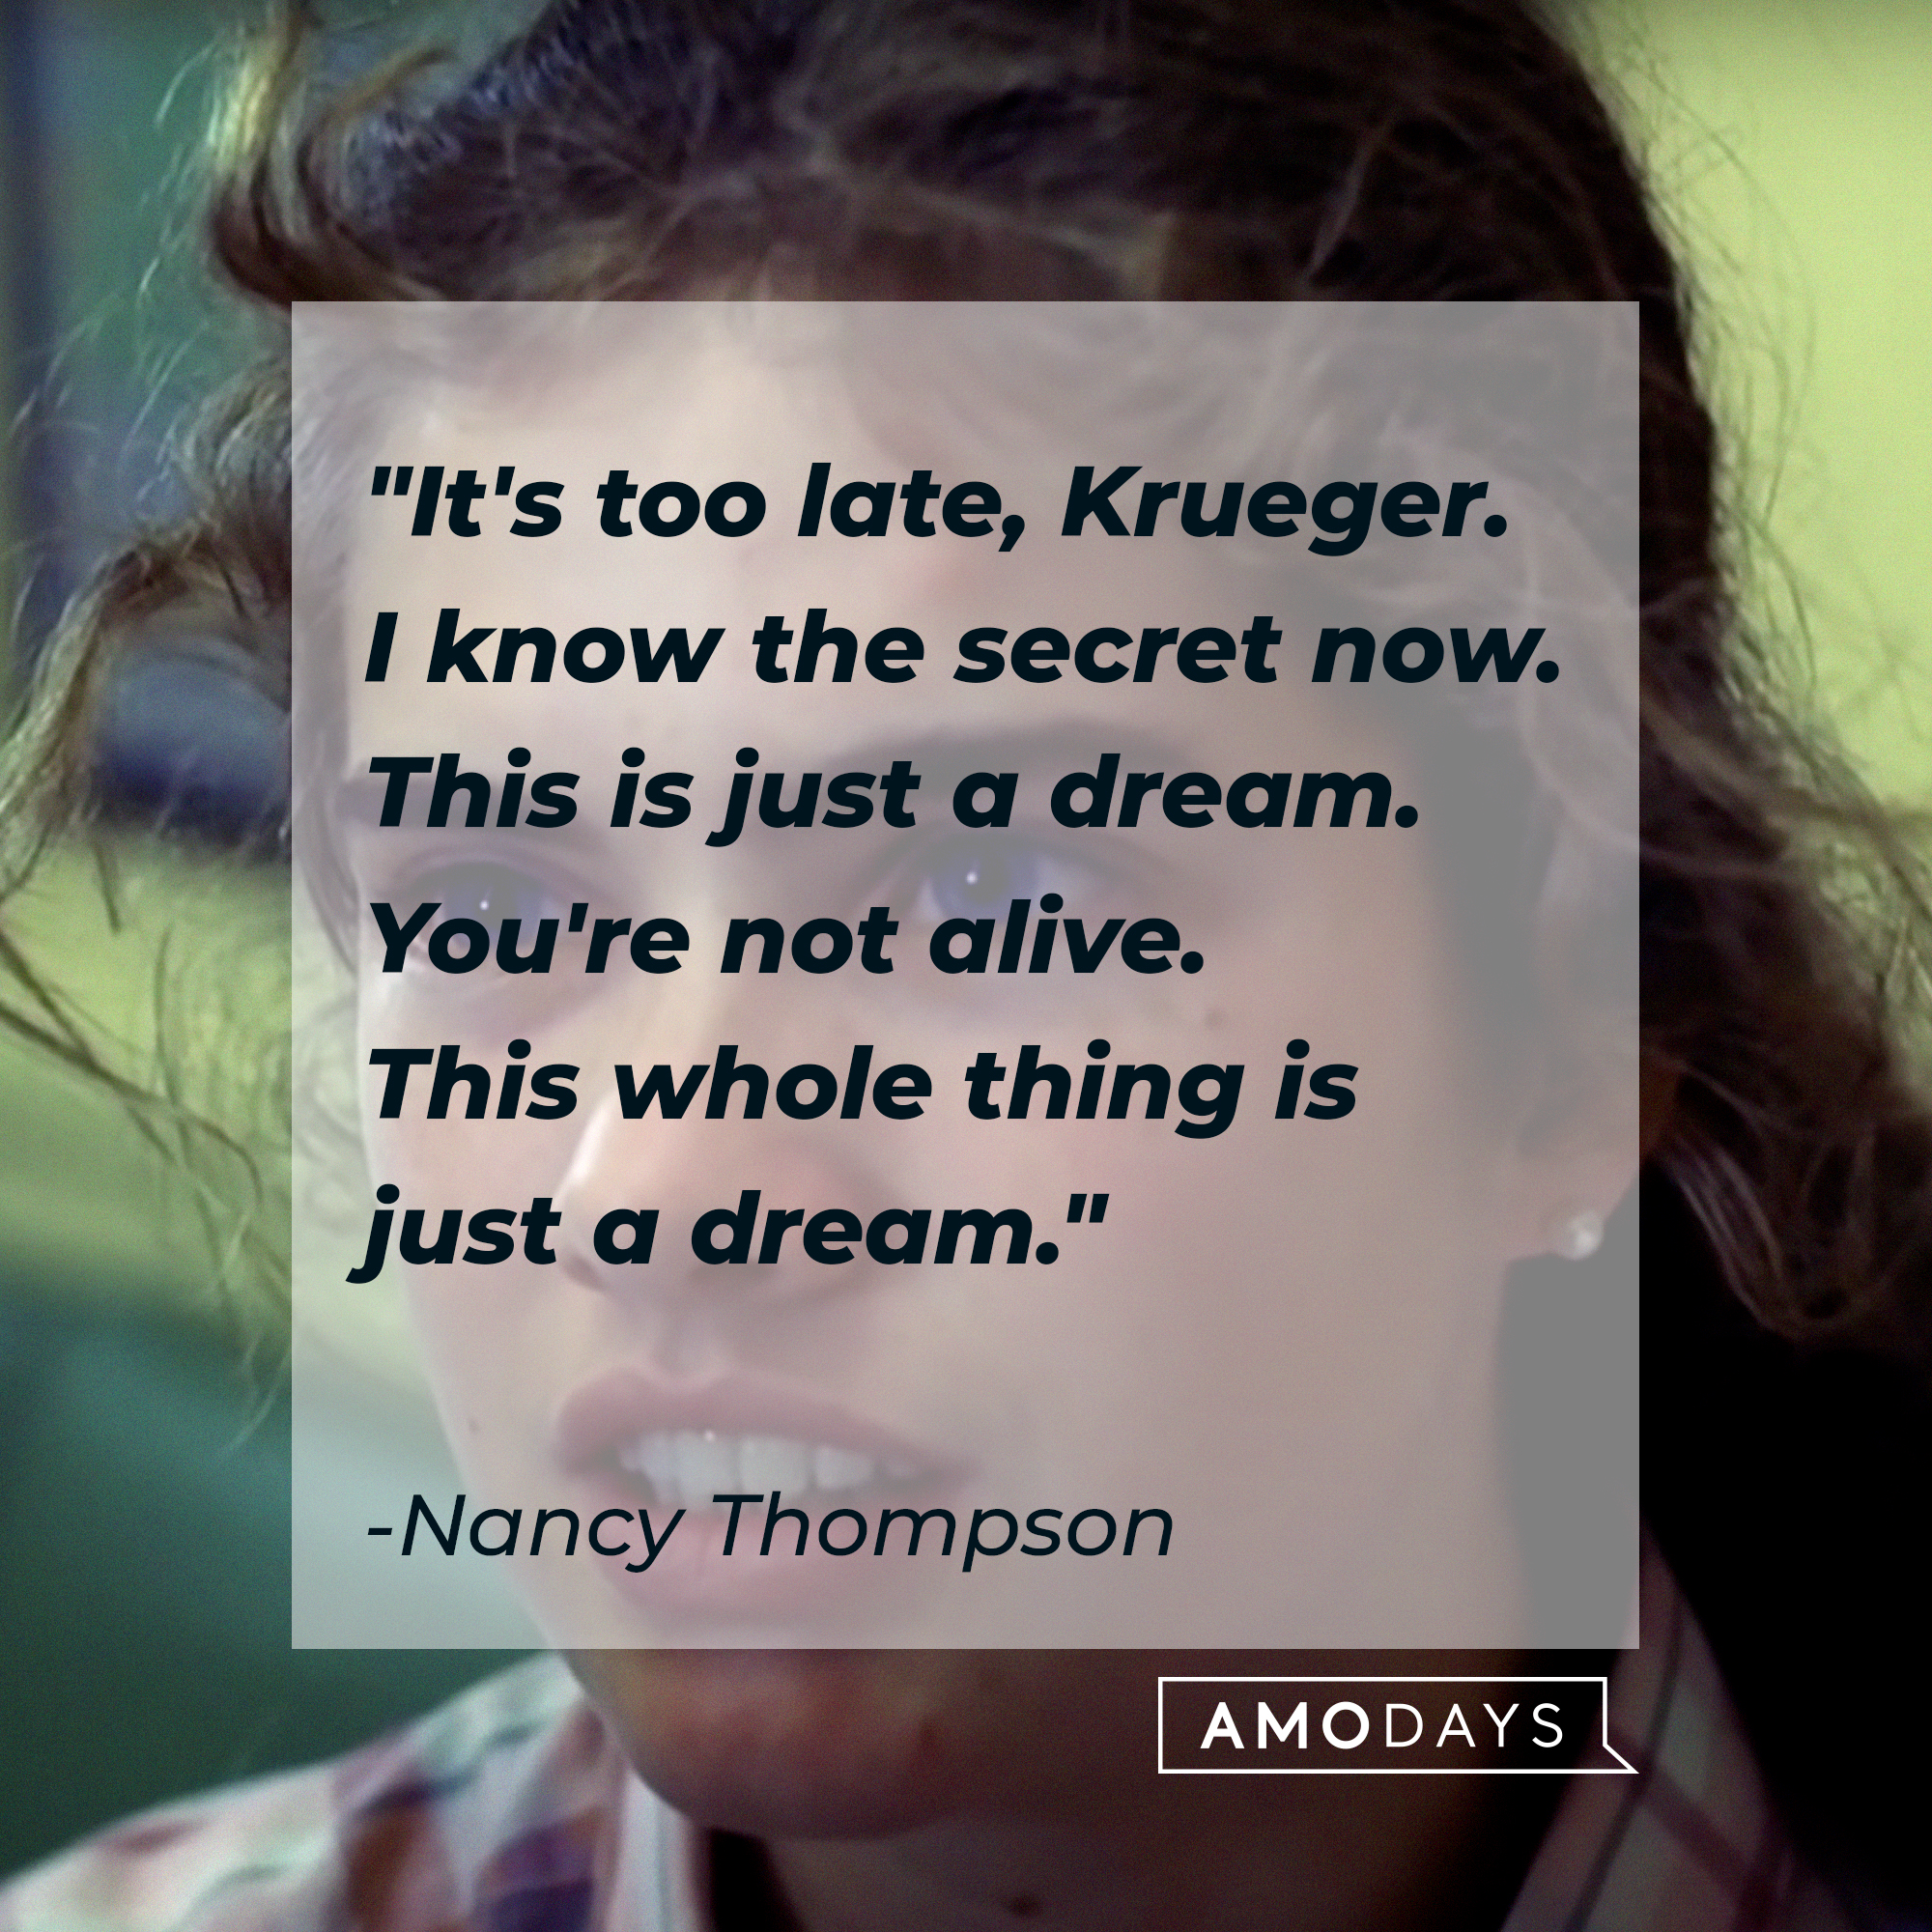 Nancy Thompson's quote: "It's too late, Krueger. I know the secret now. This is just a dream. You're not alive. This whole thing is just a dream." | Source: Facebook/ANightmareonElmStreet